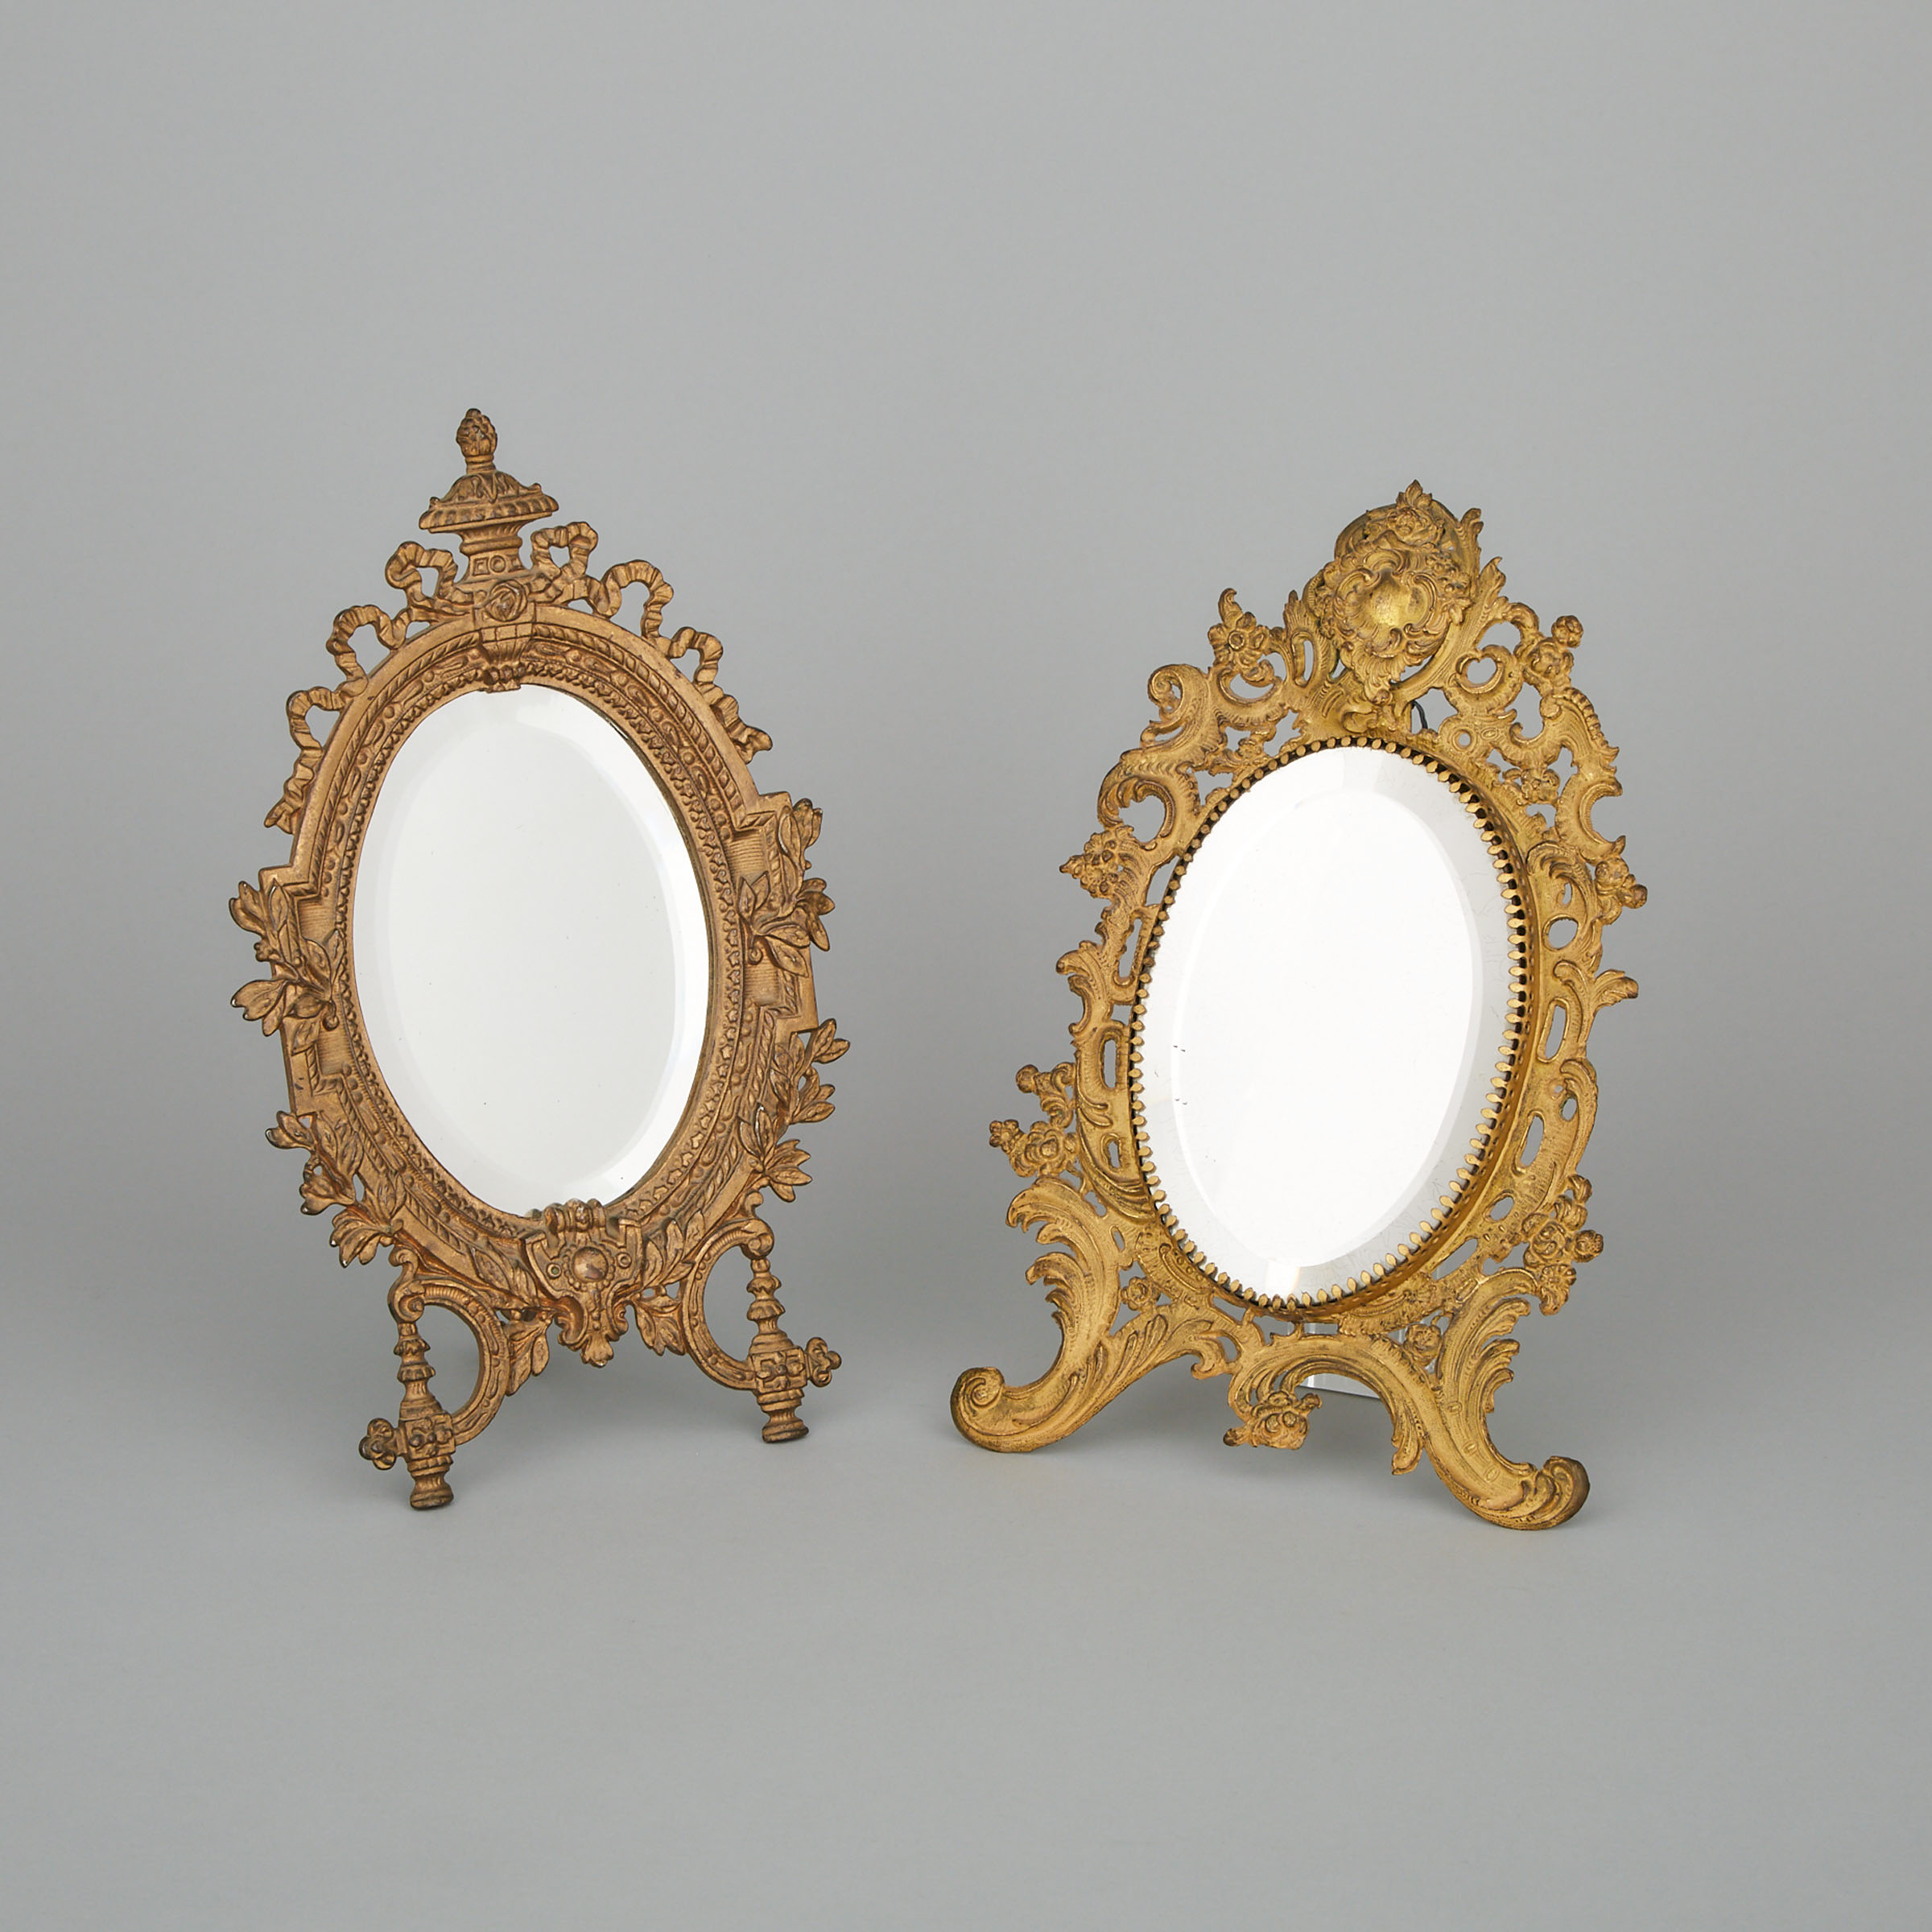 Two Small Victorian GIlt Metal Oval Vanity Mirrors, 19th century